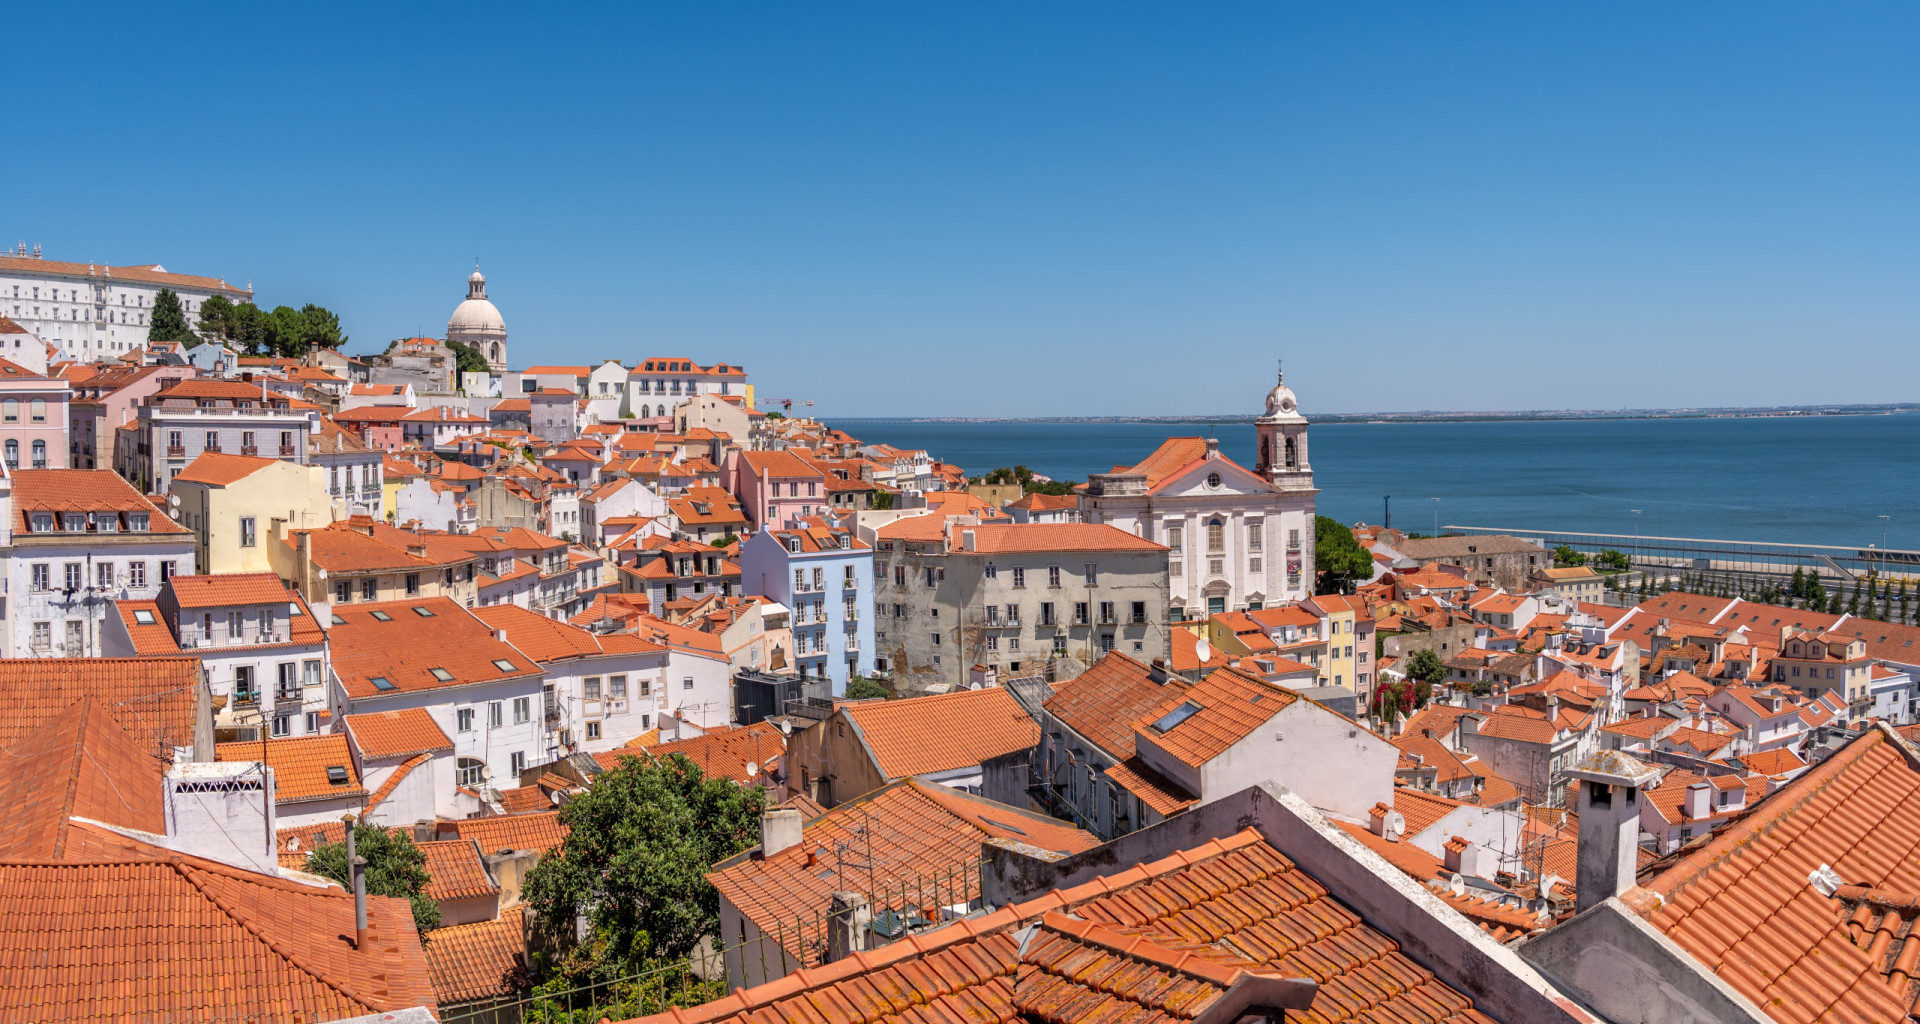 <p>The winding, narrow streets of Alfama, Lisbon's old town, attract pickpockets. Keep an eye on your belongings and stay alert when navigating busy areas.</p><p><a href="https://www.msn.com/en-us/community/channel/vid-7xx8mnucu55yw63we9va2gwr7uihbxwc68fxqp25x6tg4ftibpra?cvid=94631541bc0f4f89bfd59158d696ad7e">Follow us and access great exclusive content every day</a></p>